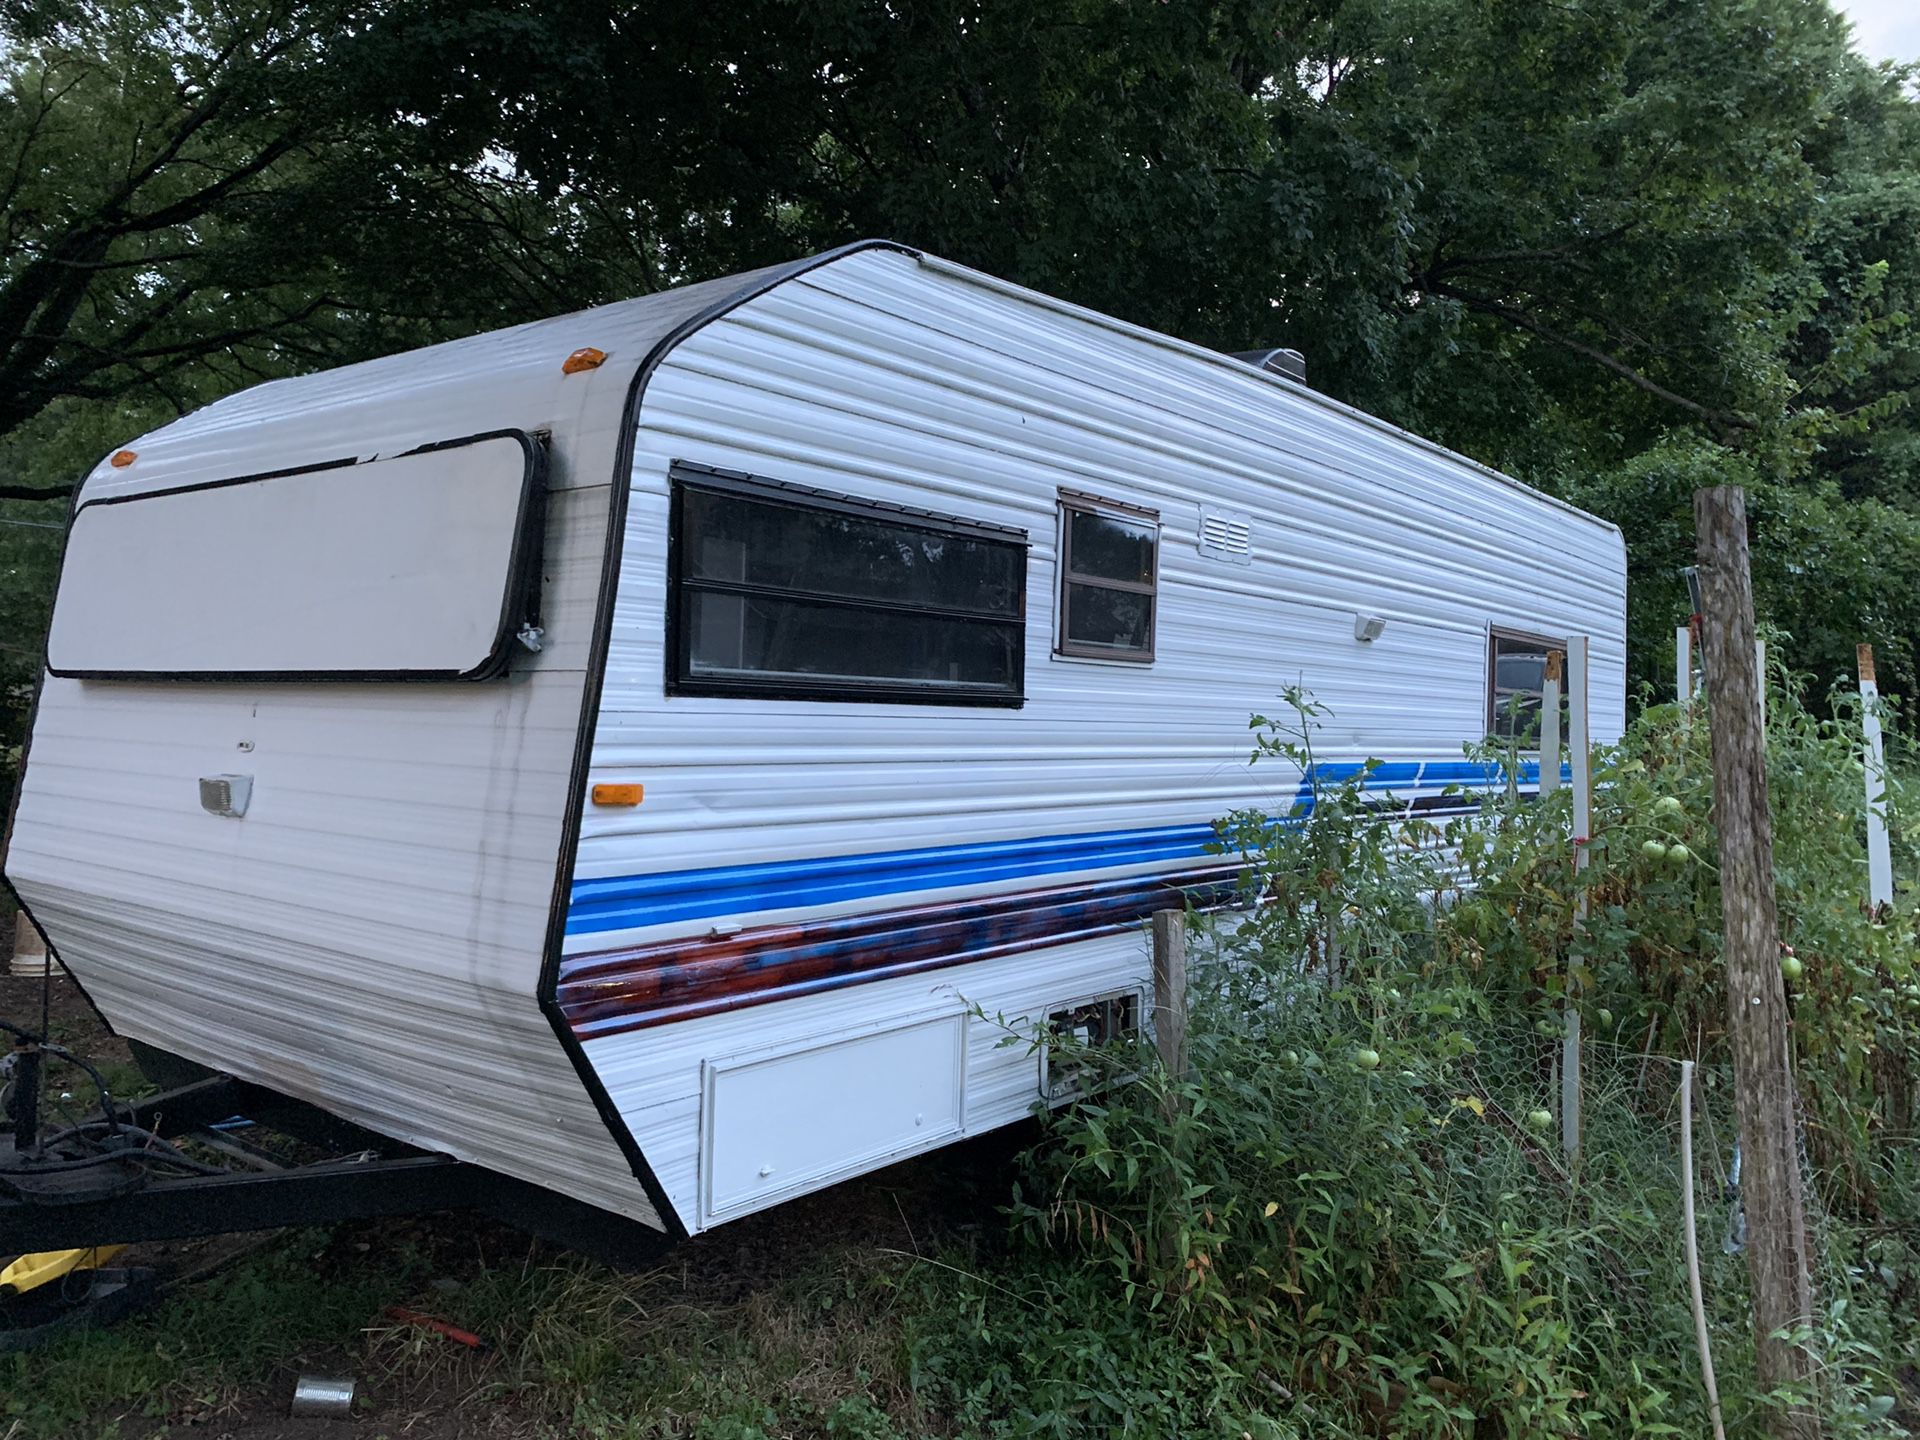 Camper in very good condition for Sale is changed by a large truck